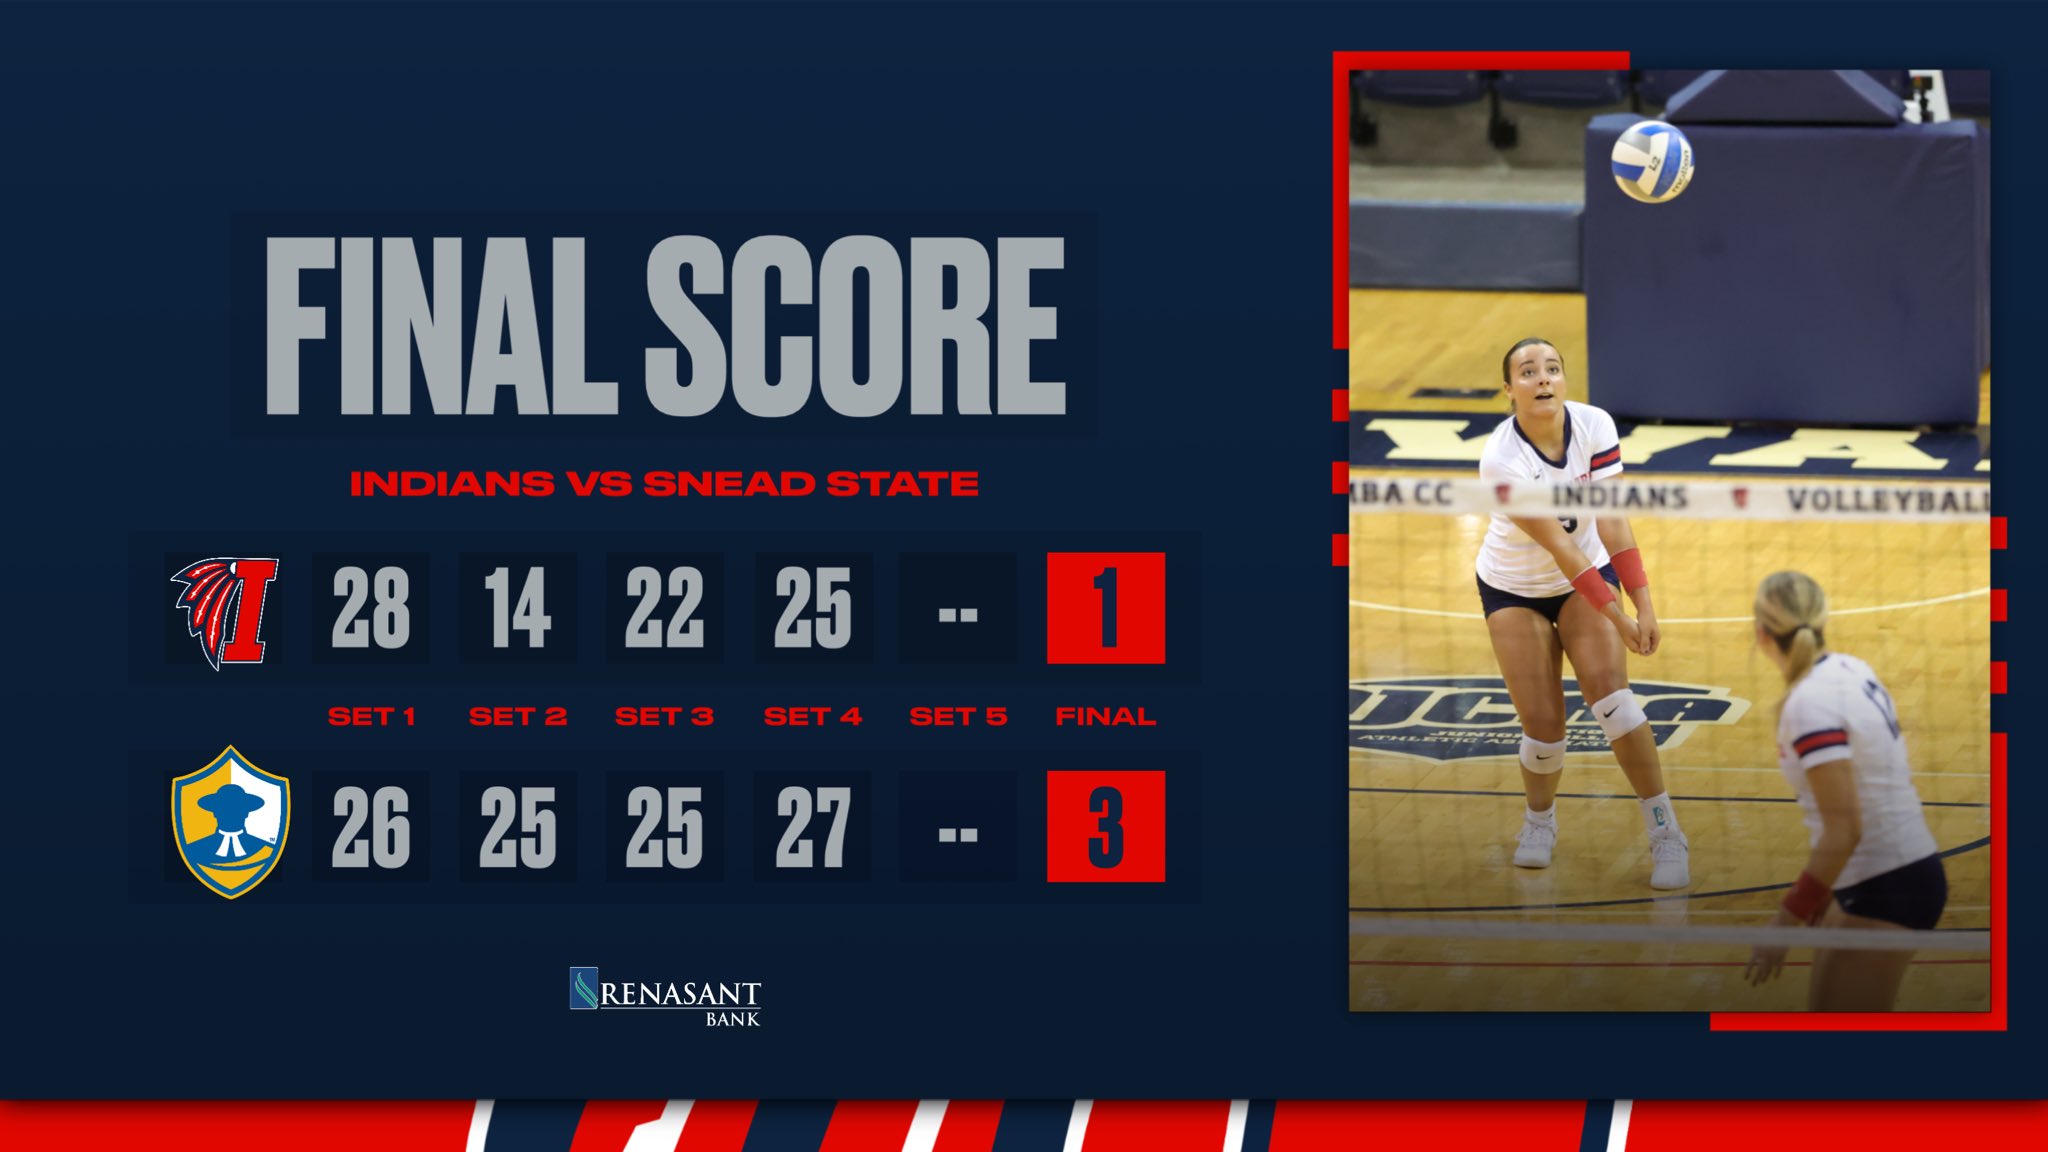 ICC drops 3-1 match against Snead State